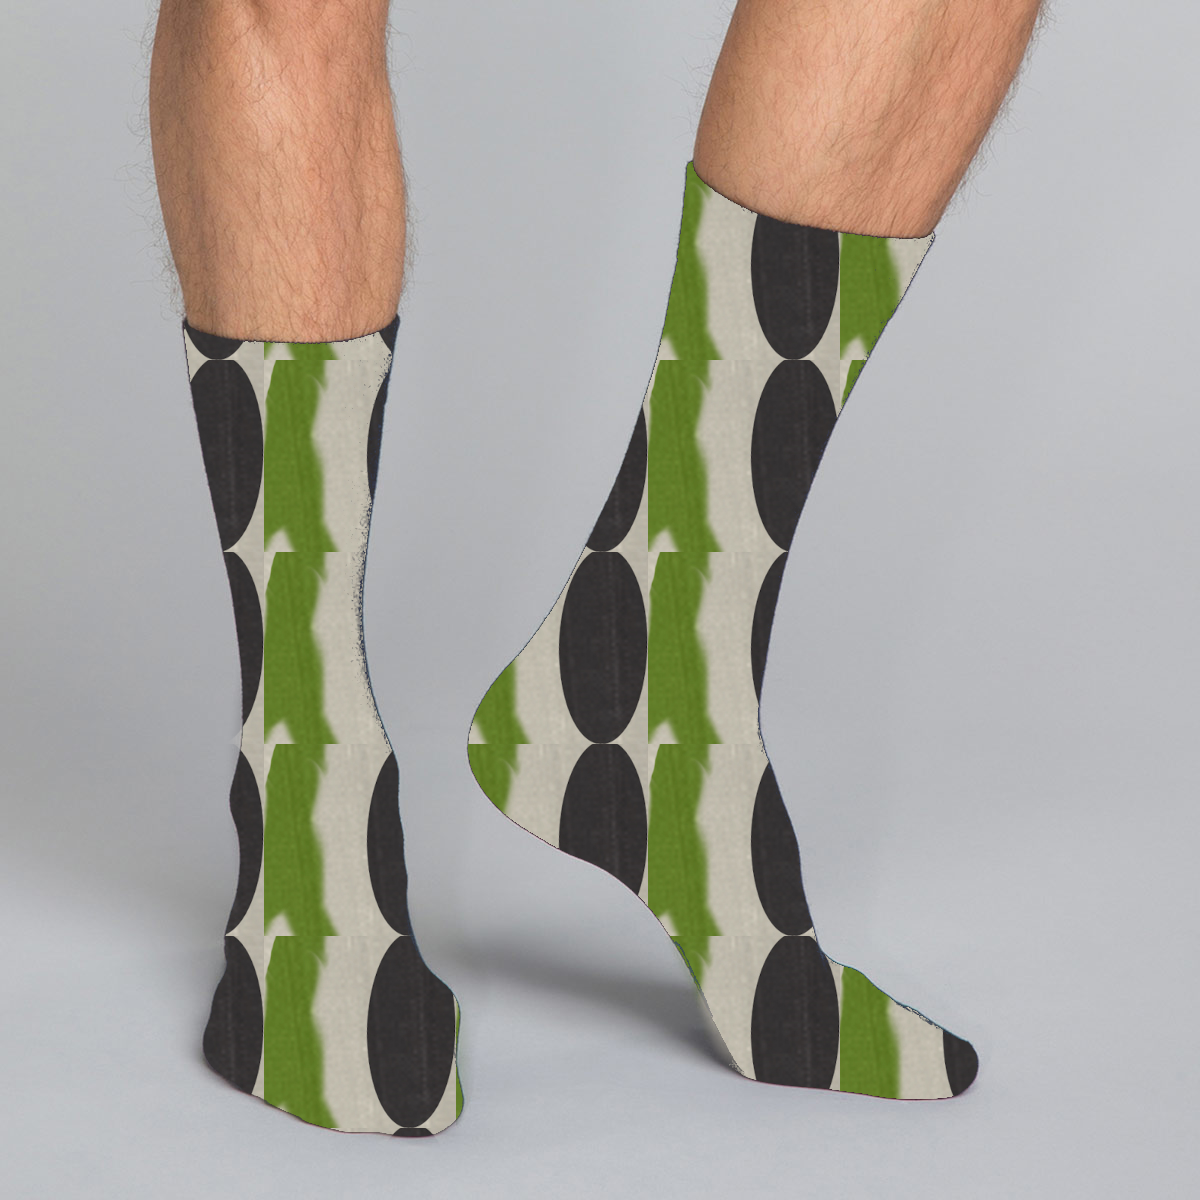 Women's, men's & youth's casual crew socks in unique colorful green, brown and beige design celebrating food, fashion, fitness, fun